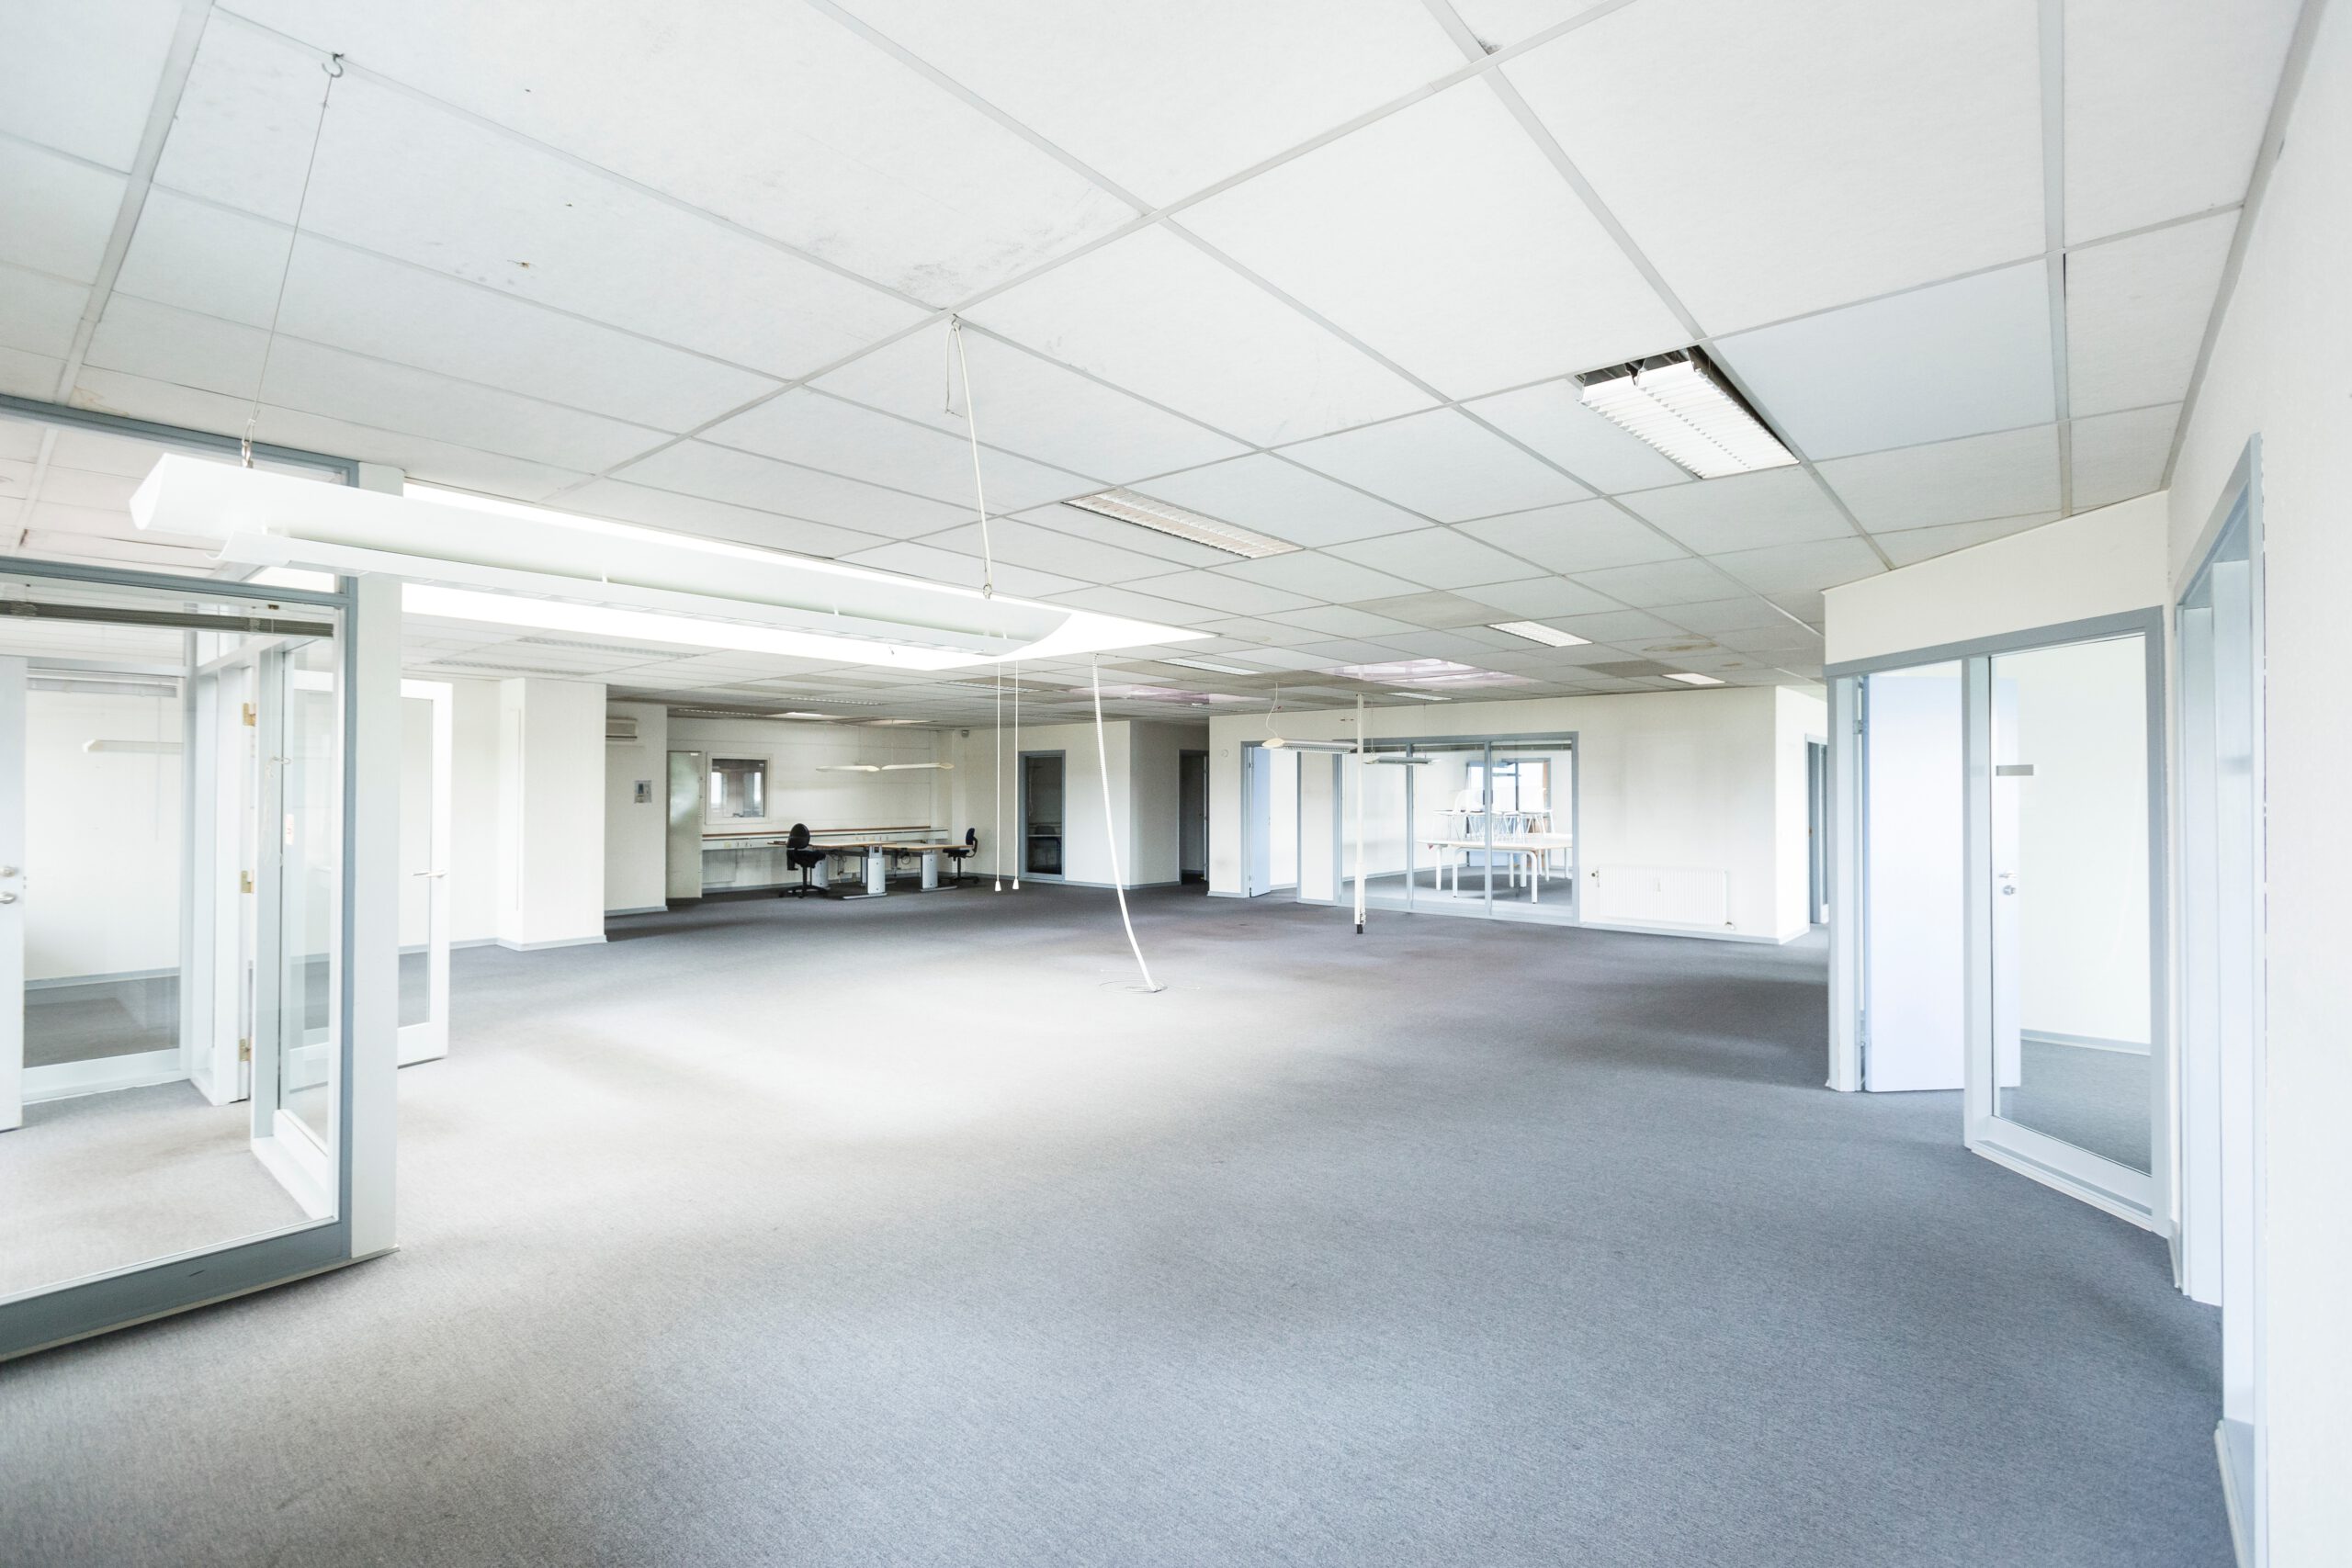 What are Acoustical Ceilings used for?